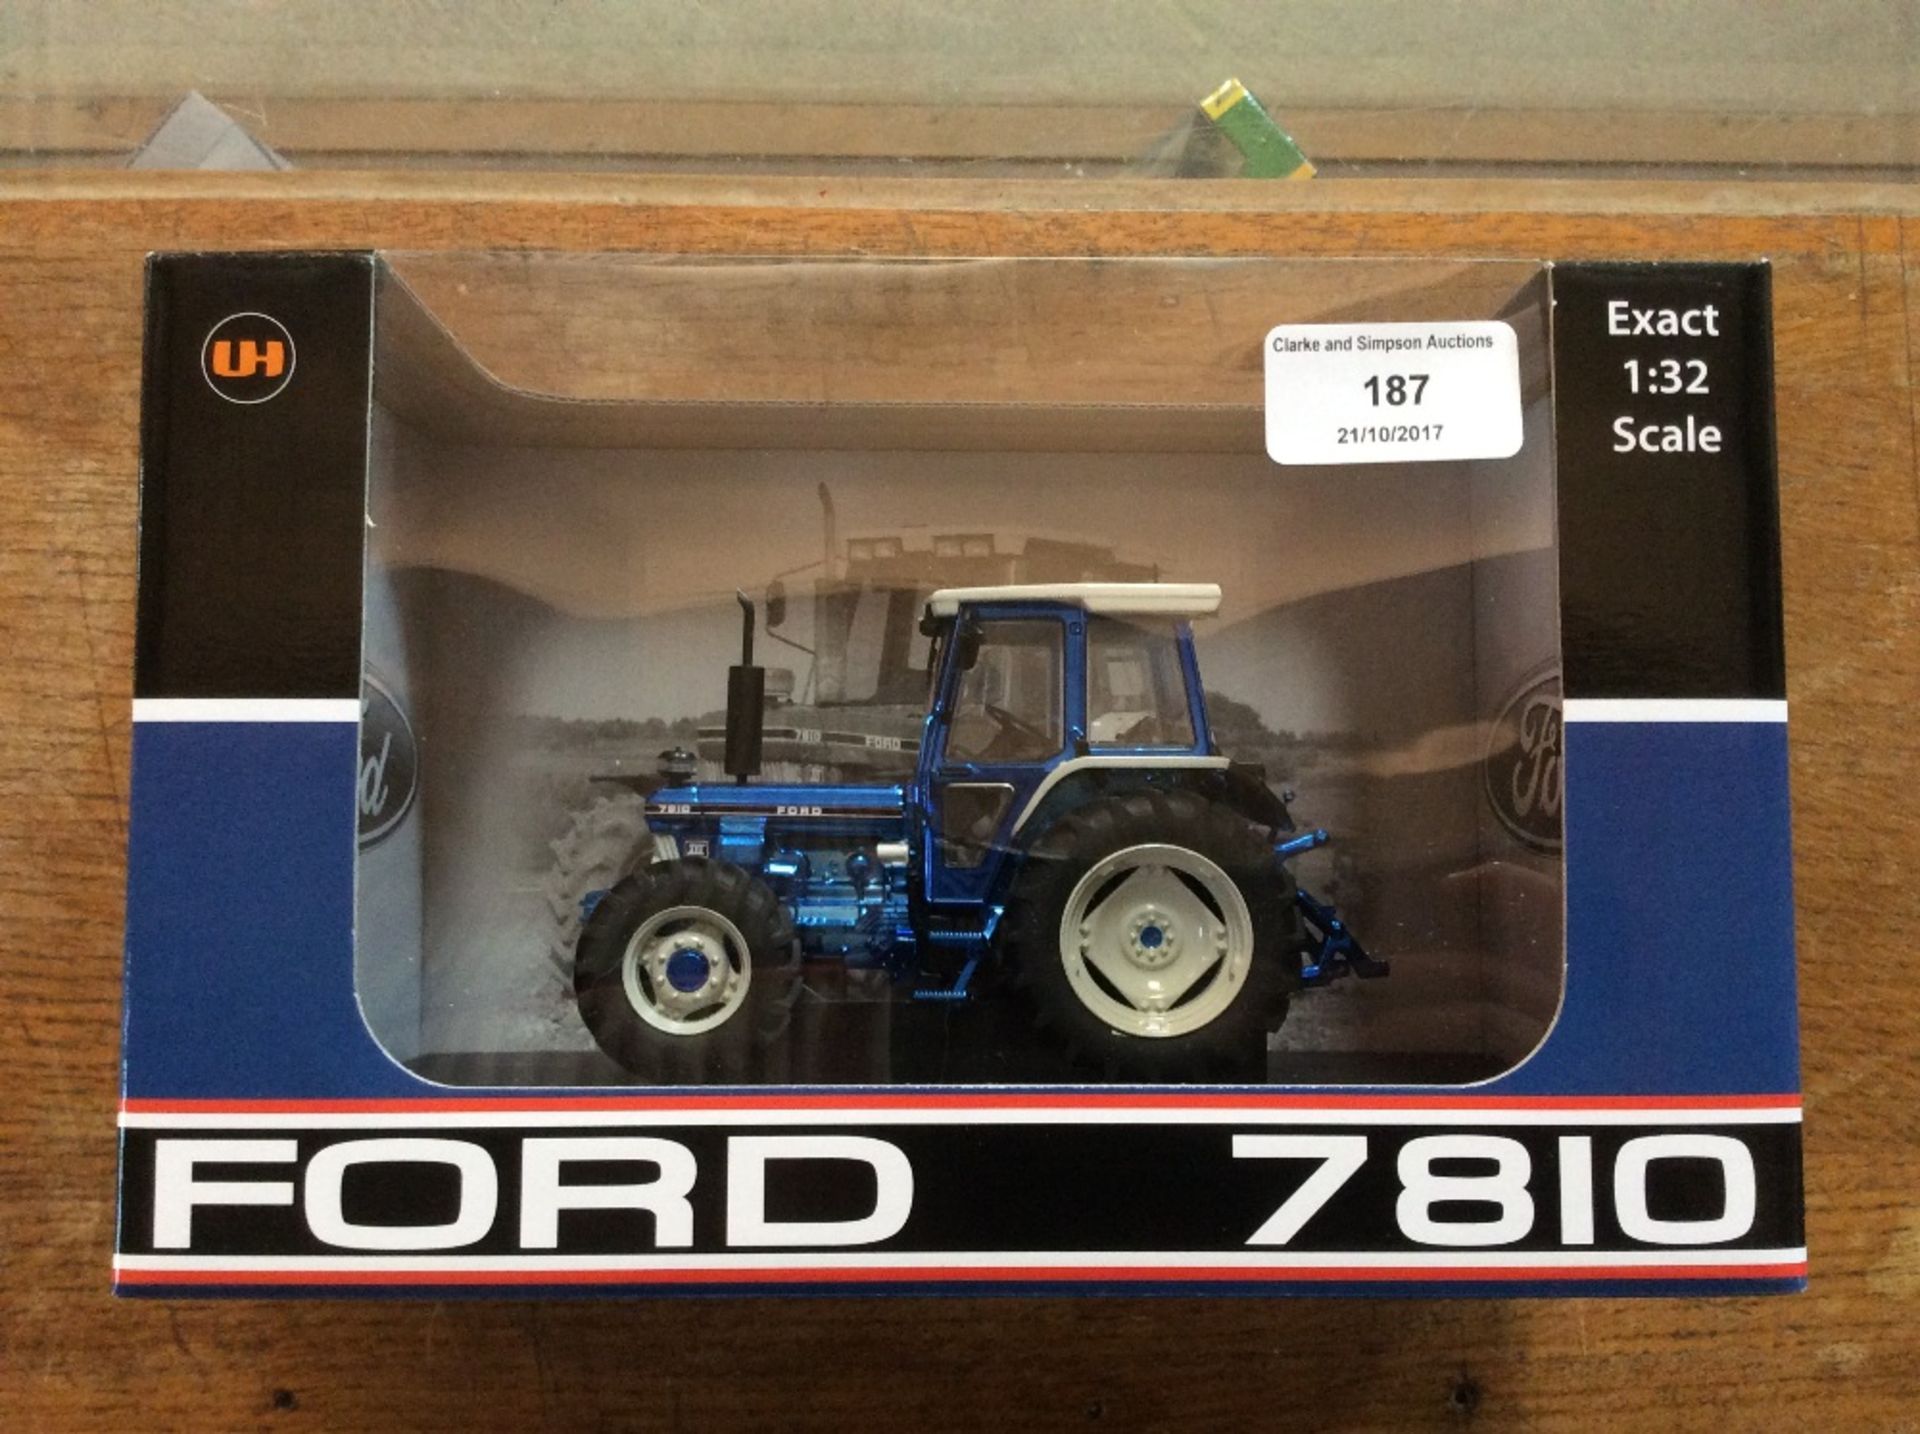 UH Ford 7810 chrome limited edition tractor.